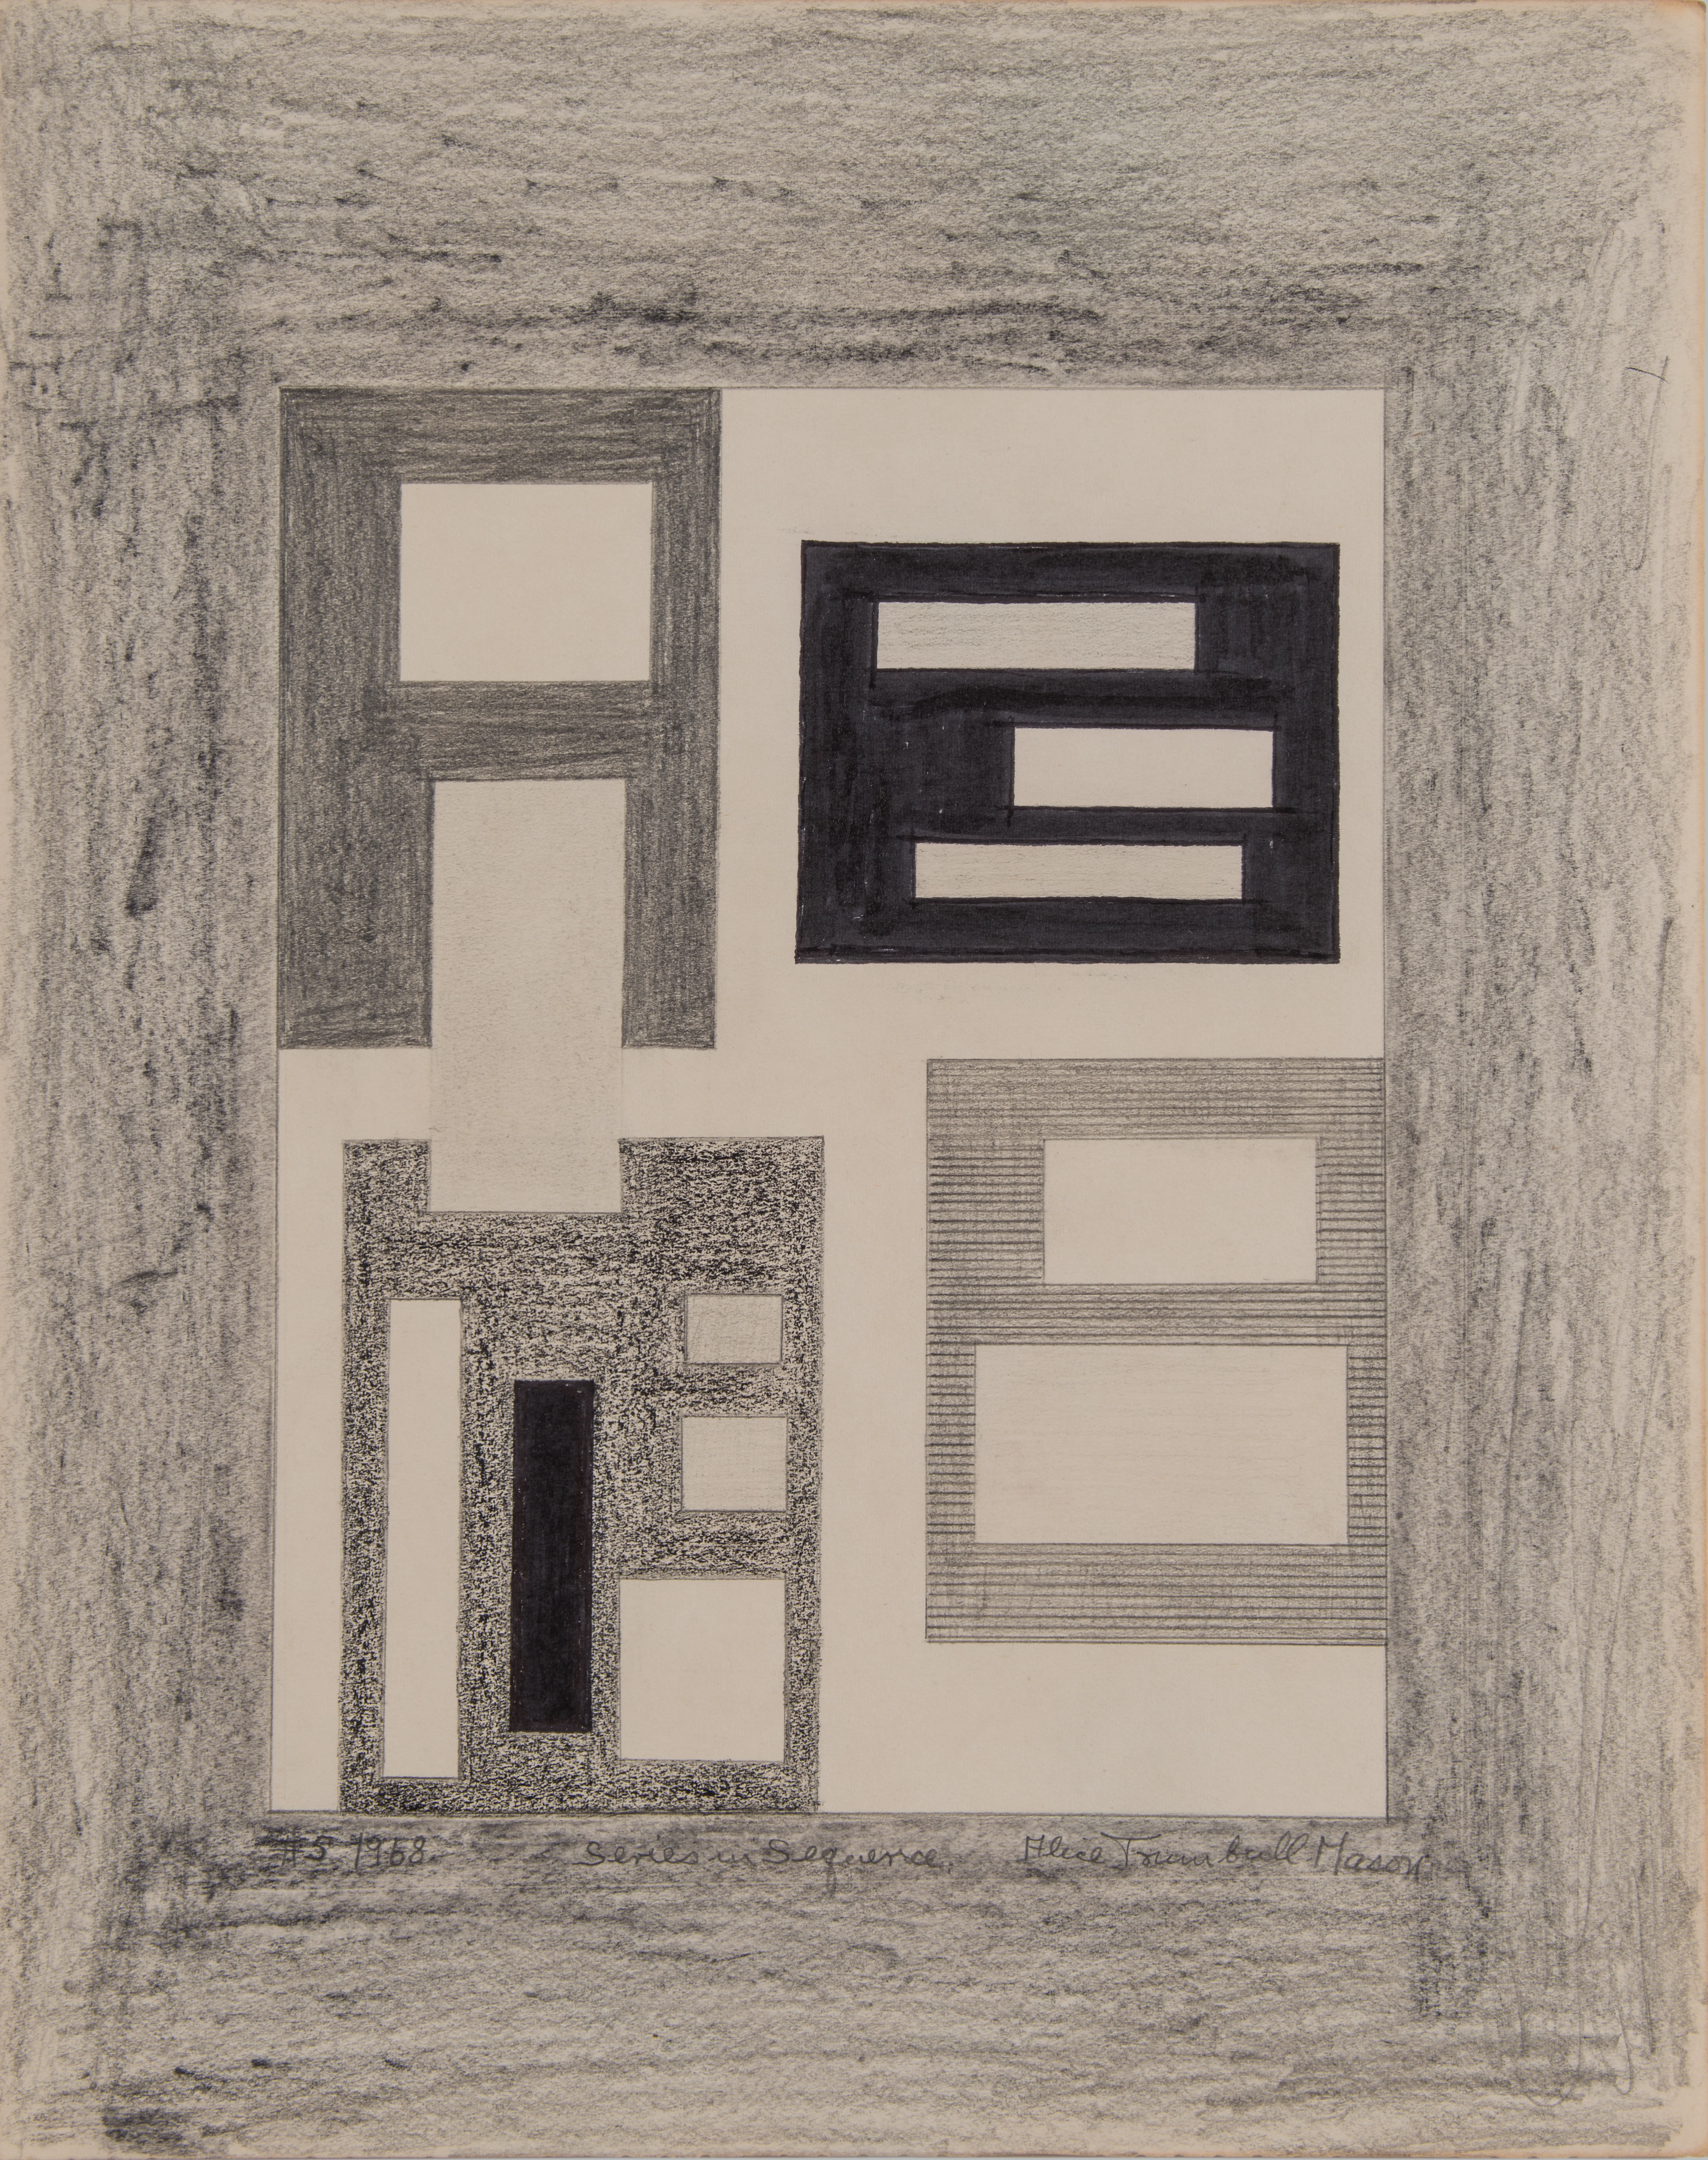 Abstract drawing with graphite, ink, and crayon on paper. The composition is comprised of white, grey, and black rectangles with a large white square, with a grey-shaded border.